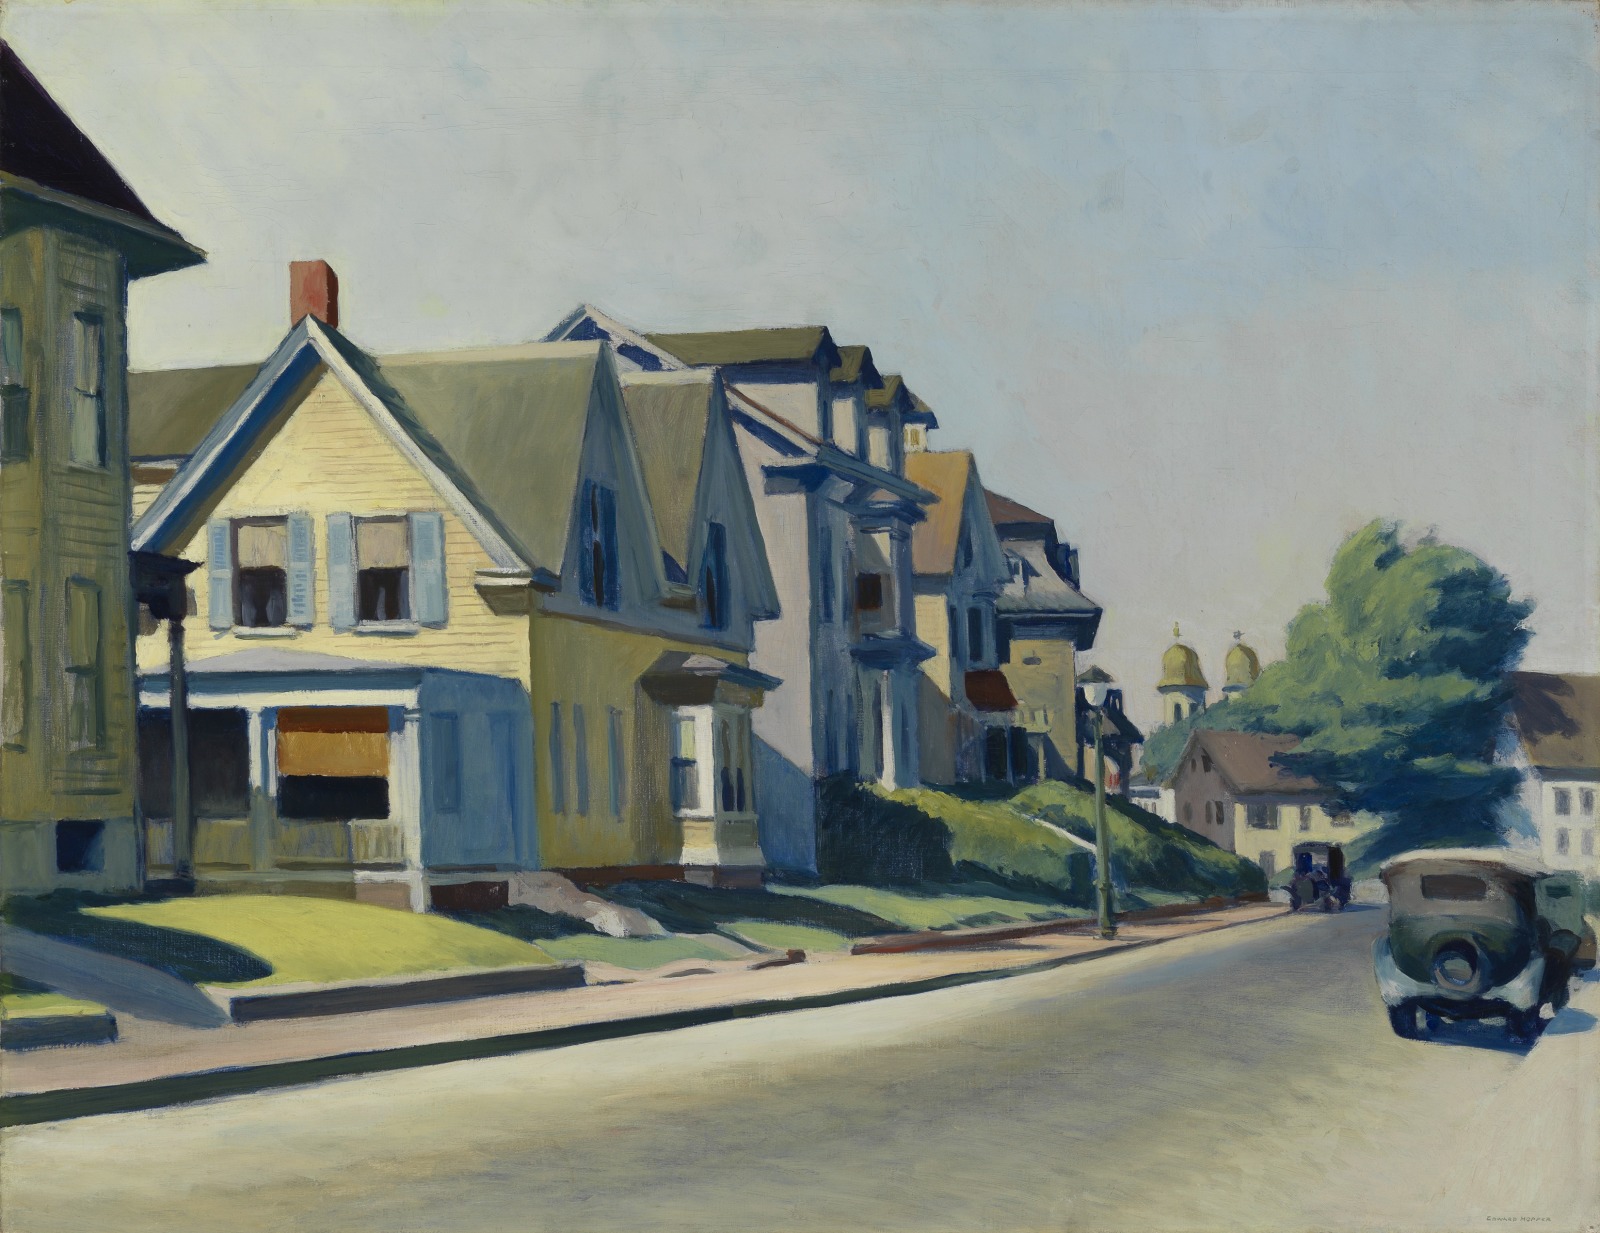 Edward Hopper's Son on Prospect Street, a painting of a suburban street with a row of houses on the left curving off into the distance. An old car is parked across the street against the curb 